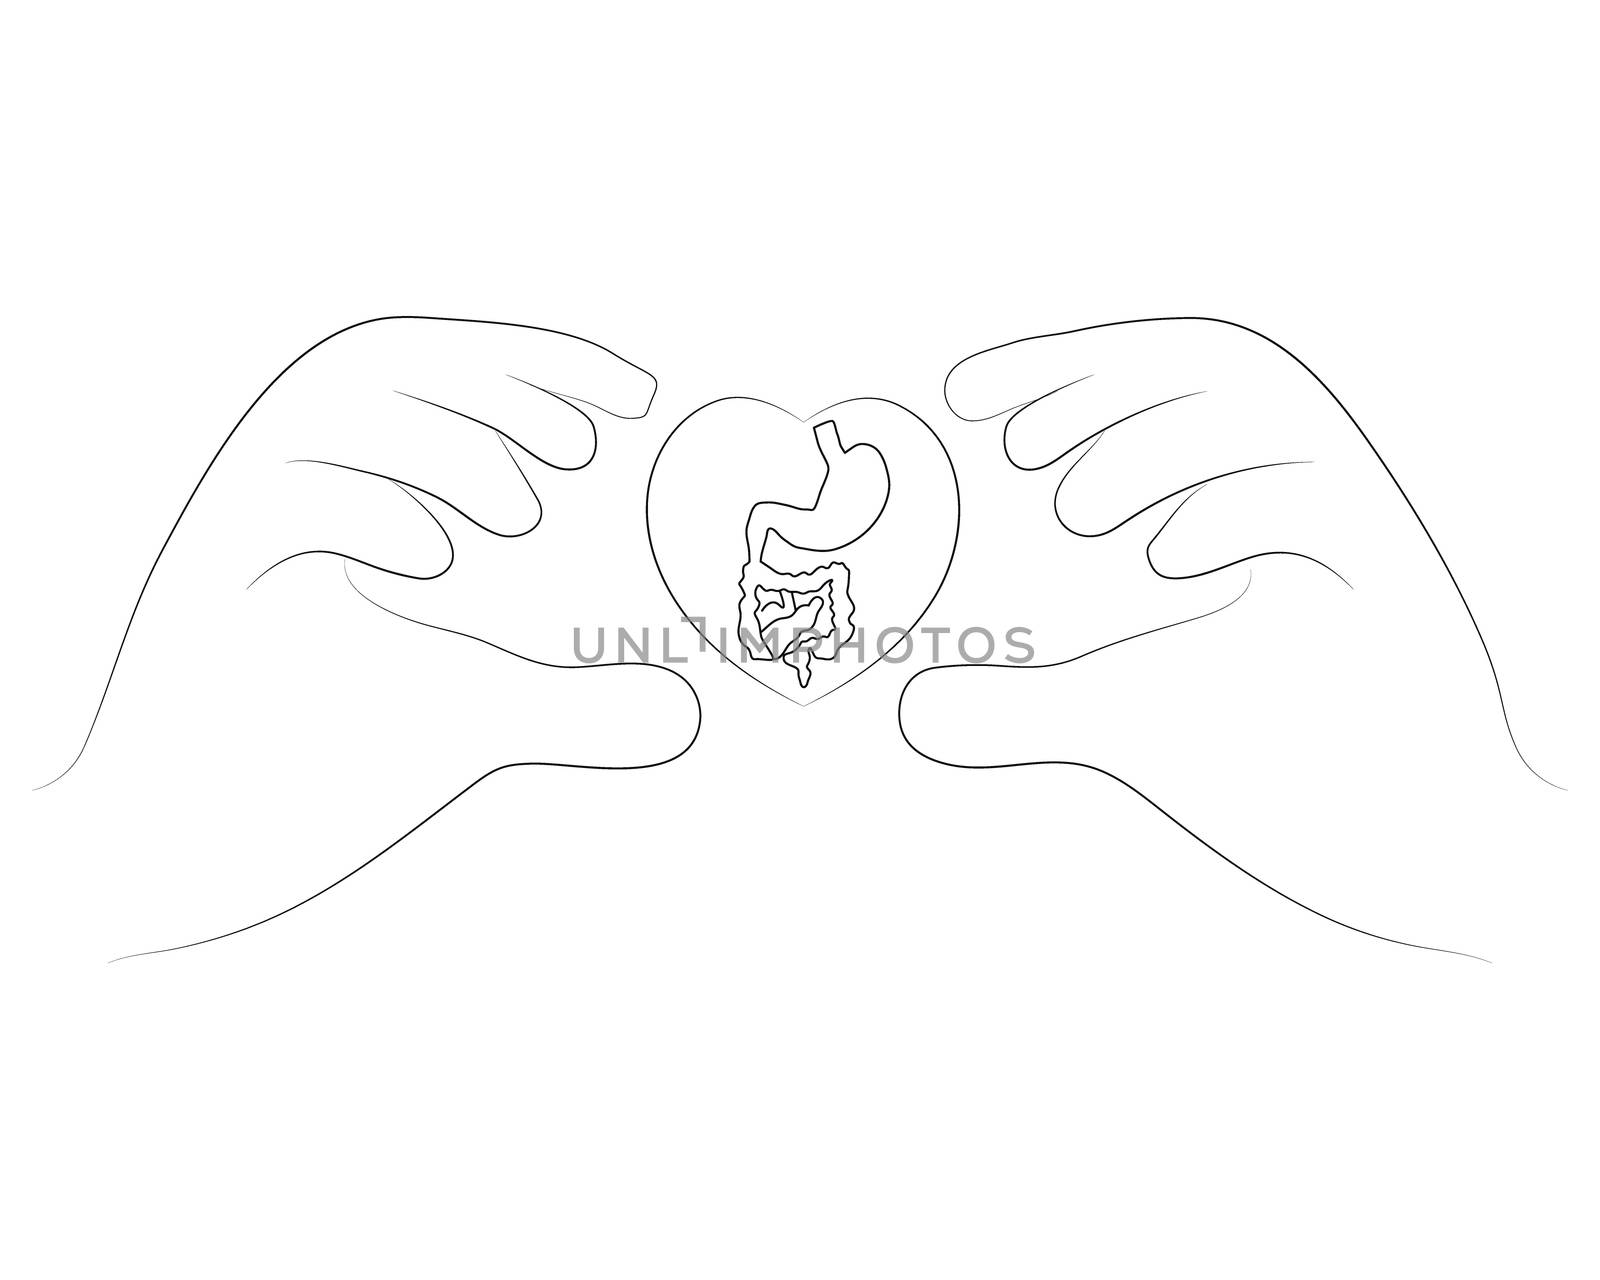 Hands holding guts in outline style illustration for probiotics health benefits. Vector illustration isolated on white background.